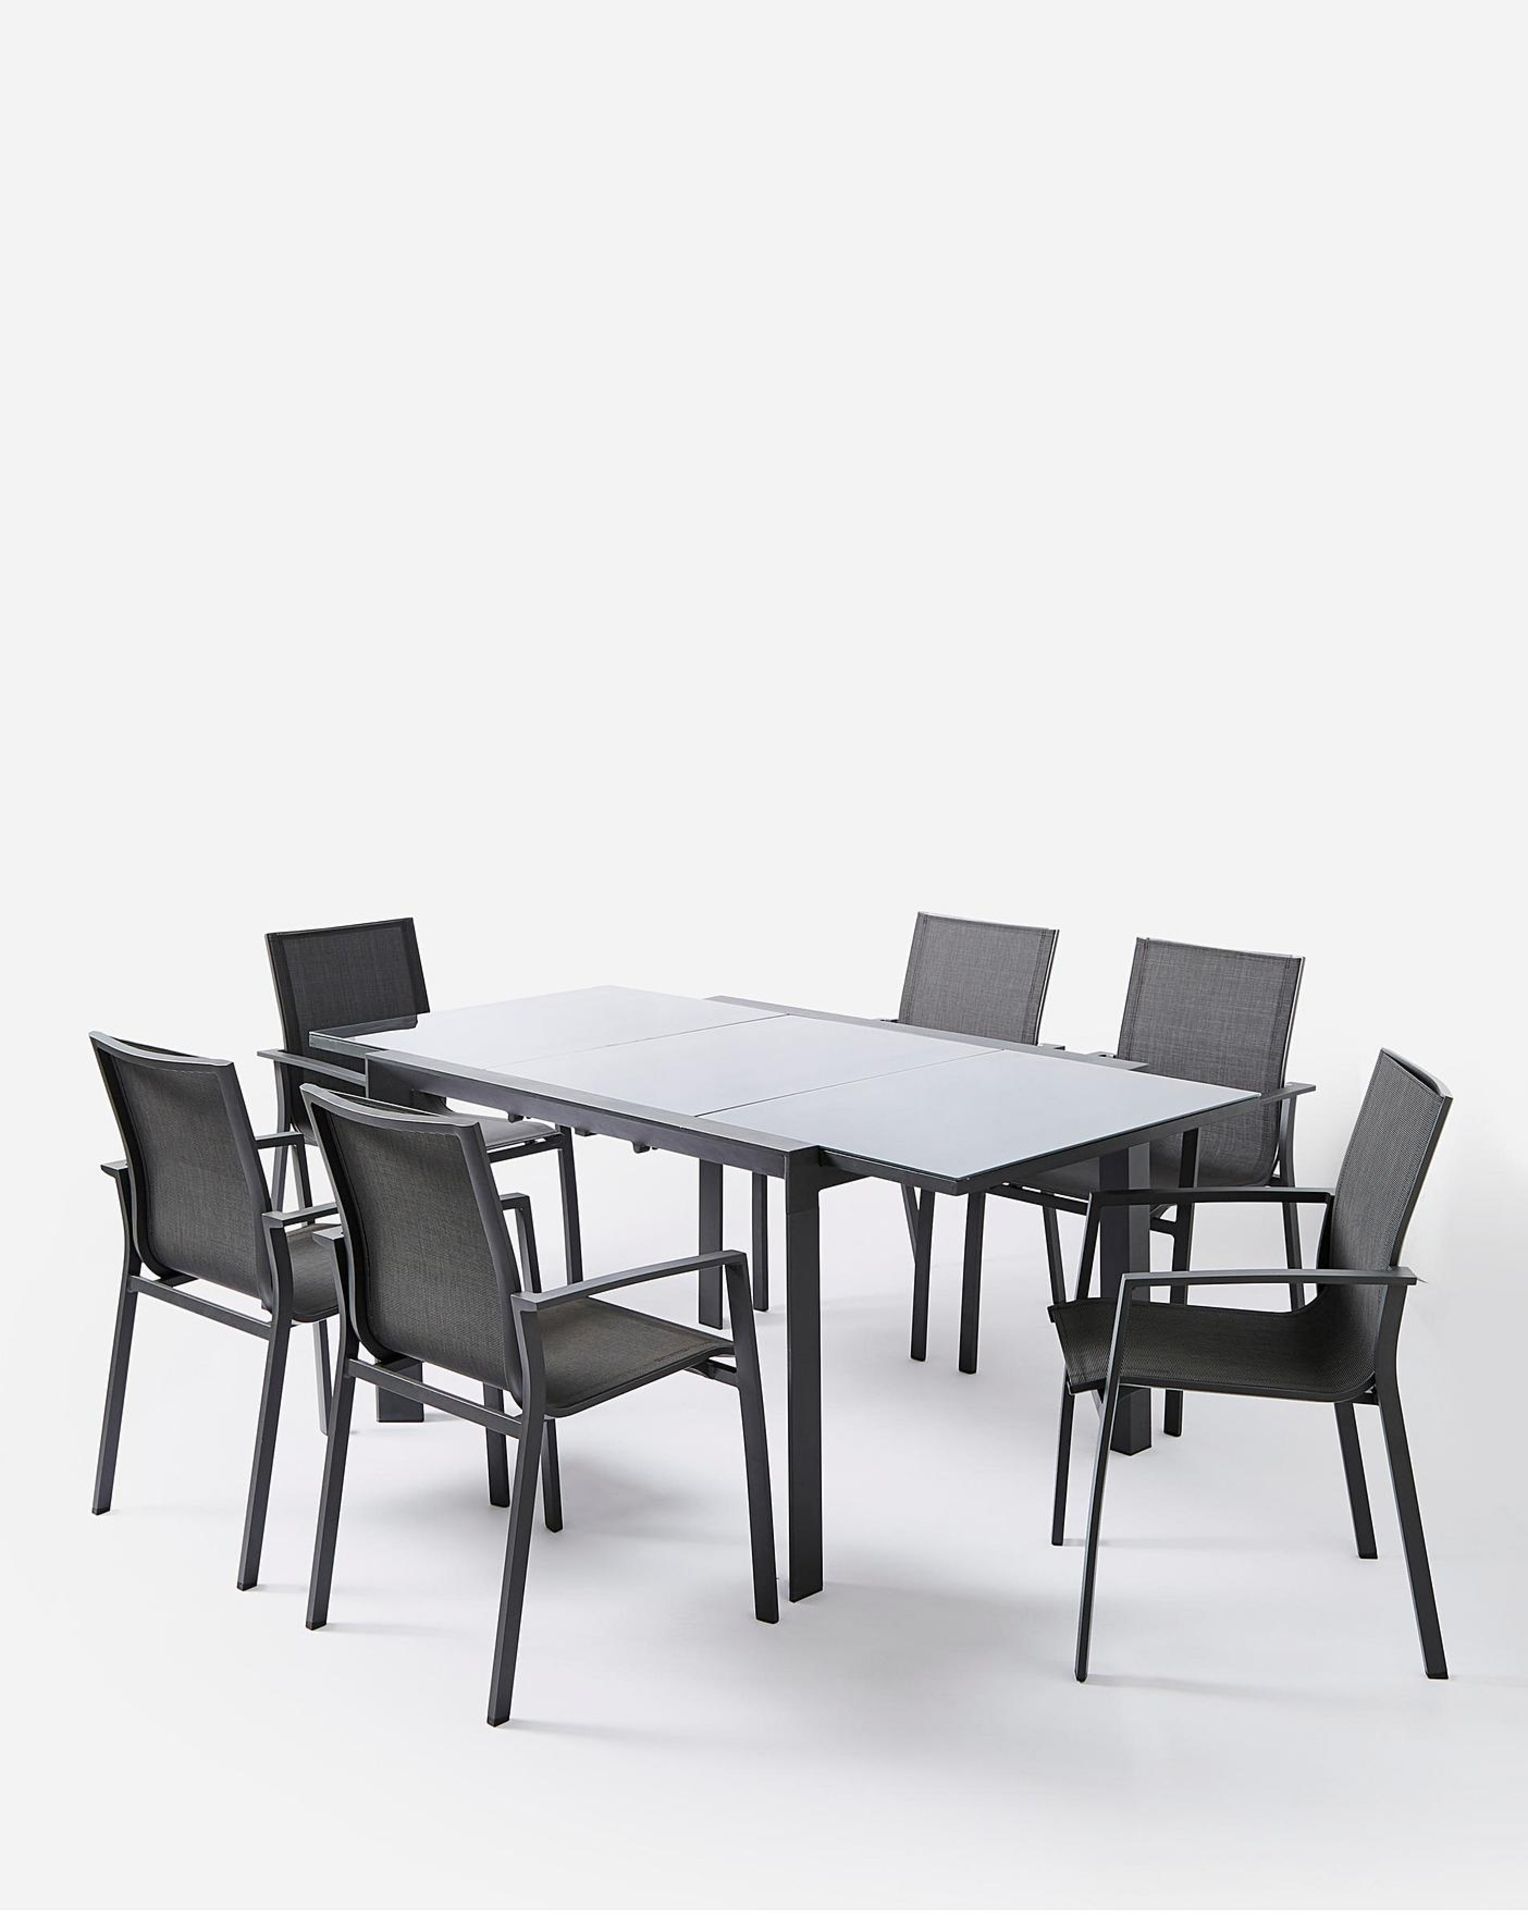 BRAND NEW Oslo 6 Seater Dining Set with Extendable Table. RRP £699 EACH. The Oslo Dining Set with - Image 4 of 4